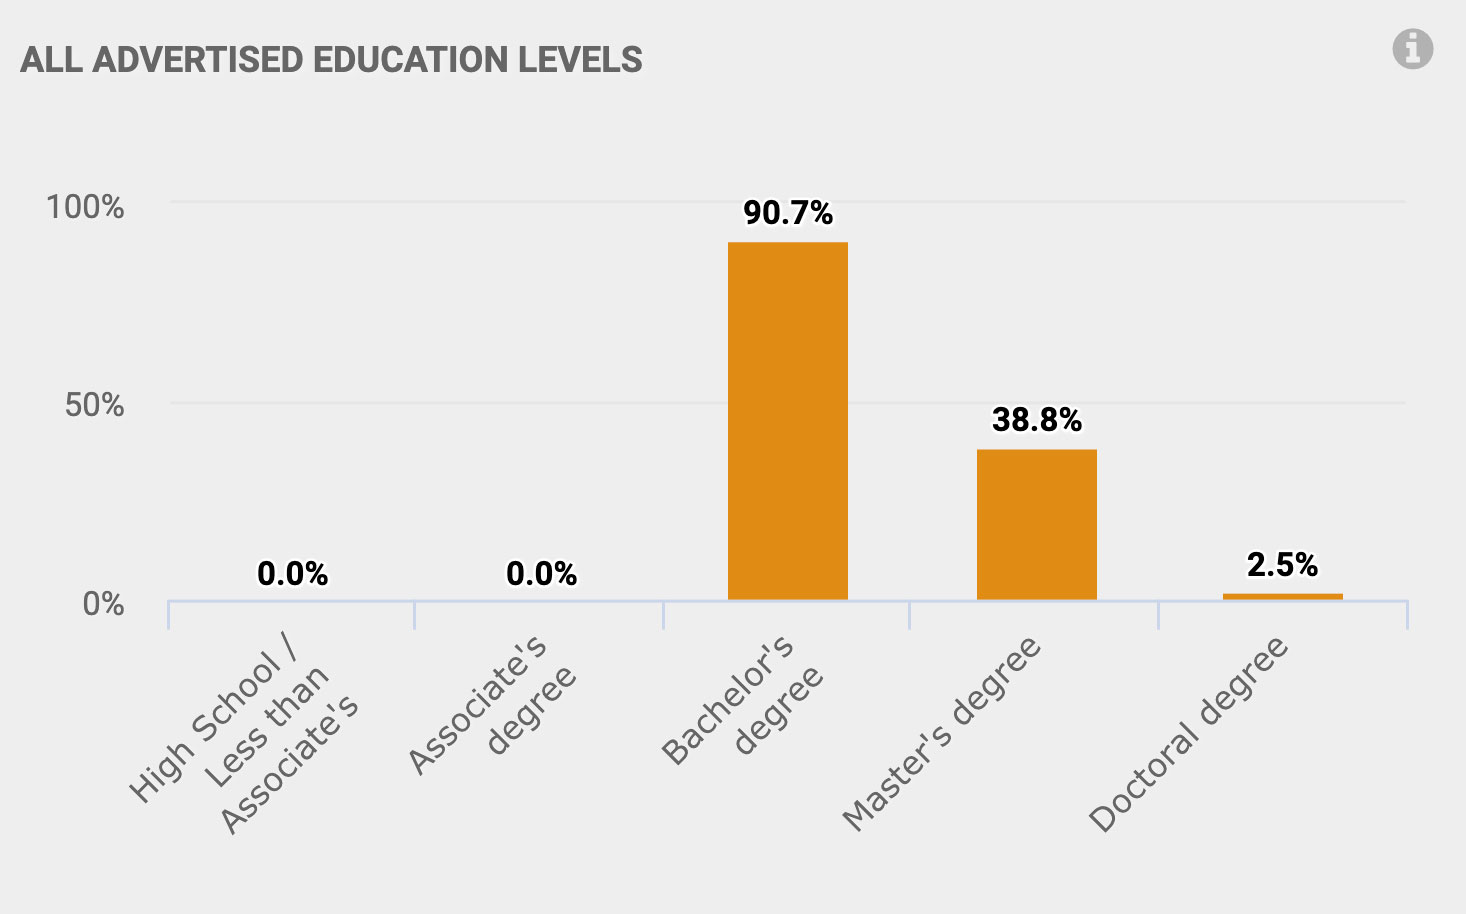 All advertised education levels: Bachelor's Degree: 90.7% Master's Degree: 38.8% Doctoral Degree: 2.5%